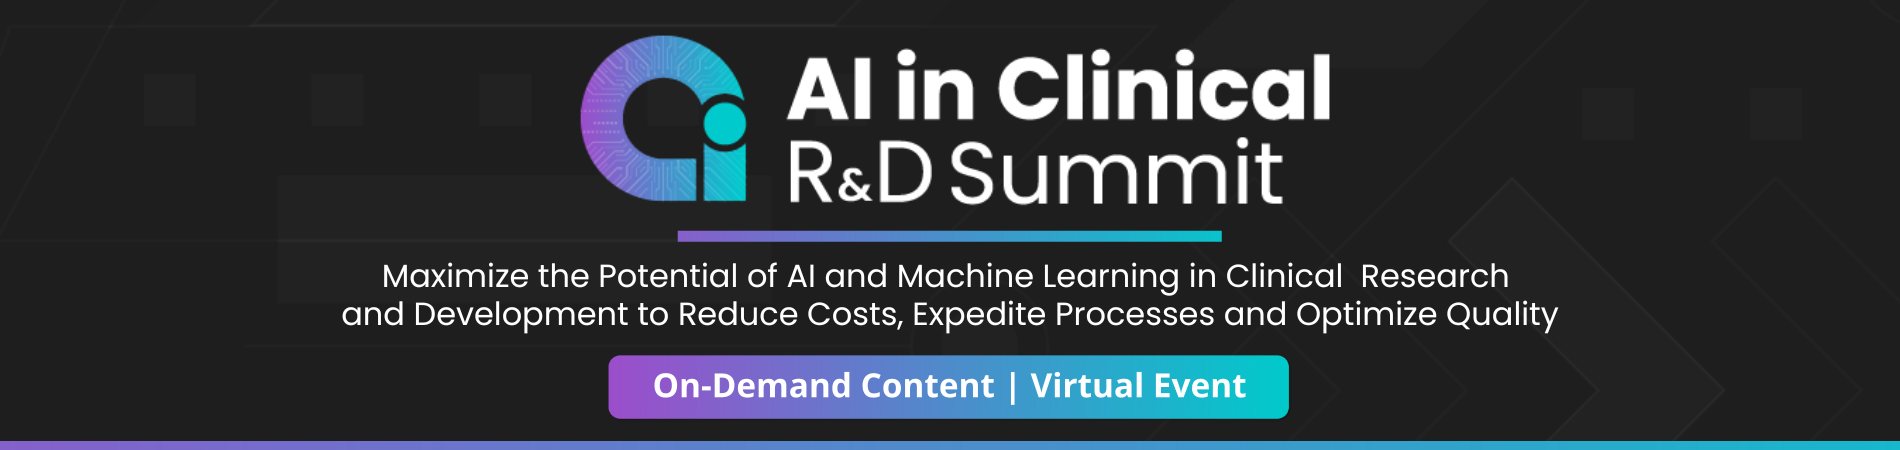 Banner of AI in Clinical R&D Summit, Tagline, Maximize the Potentialof AI and Machine Learning in Clinical Research and Development to Reduce Costs, Expedite Processes and Optimize Quality